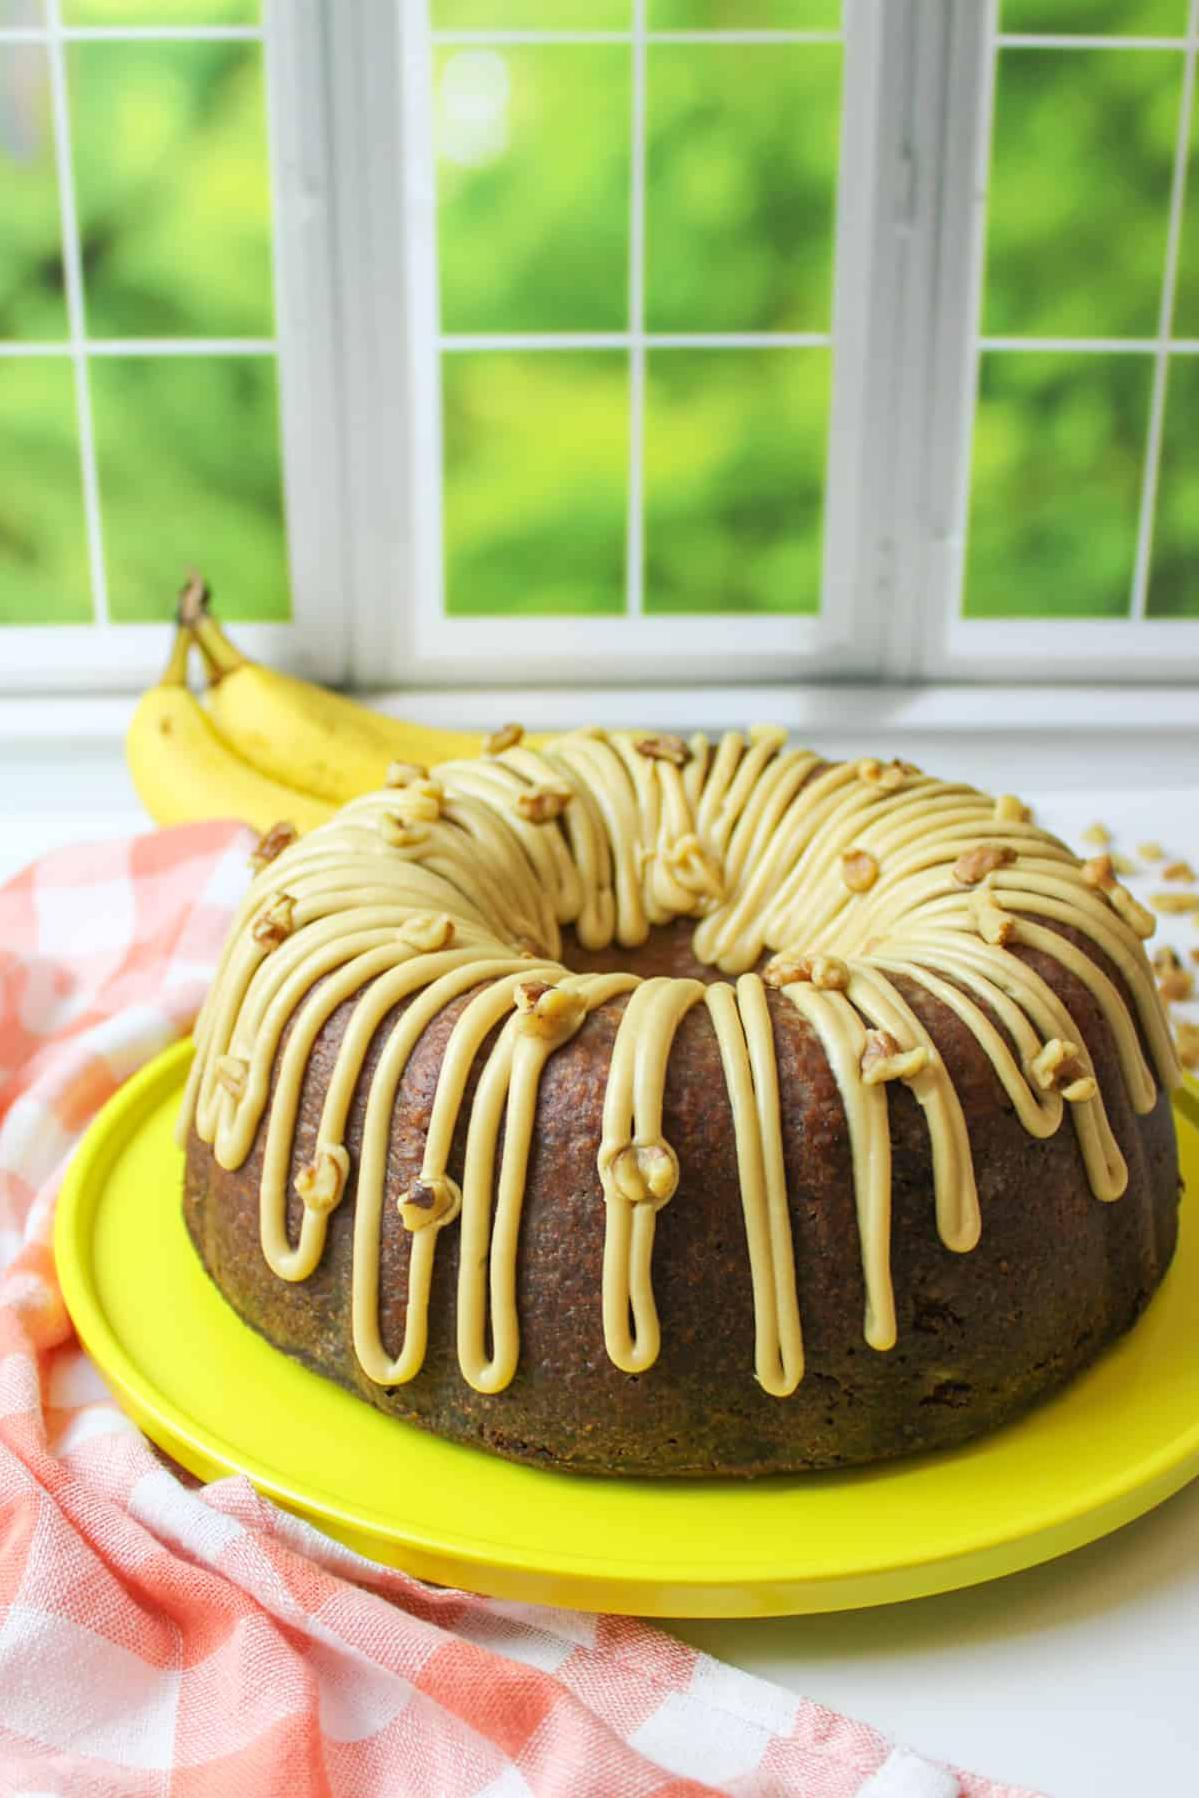  You won't be able to resist the inviting aroma of this cake as it bakes.